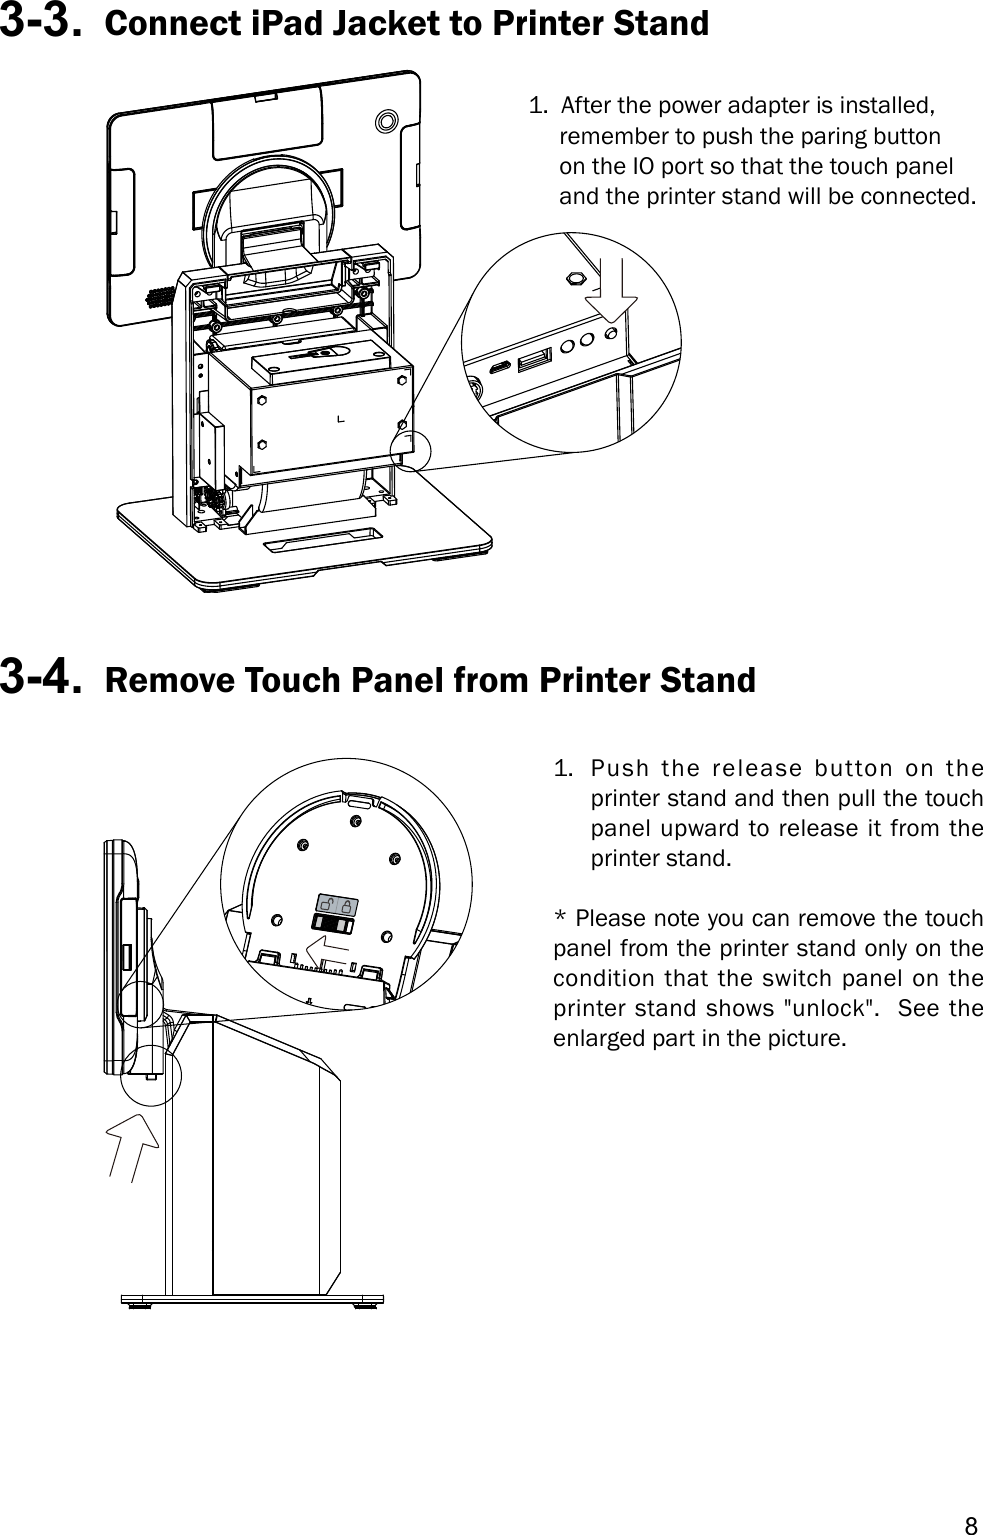 83-3.  Connect iPad Jacket to Printer Stand1.  After the power adapter is installed,      remember to push the paring button      on the IO port so that the touch panel      and the printer stand will be connected.3-4.  Remove Touch Panel from Printer Stand1.  Push the release button on the printer stand and then pull the touch panel upward to release it from the printer stand.* Please note you can remove the touch panel from the printer stand only on the condition that the switch panel on the printer stand shows &quot;unlock&quot;.  See the enlarged part in the picture.